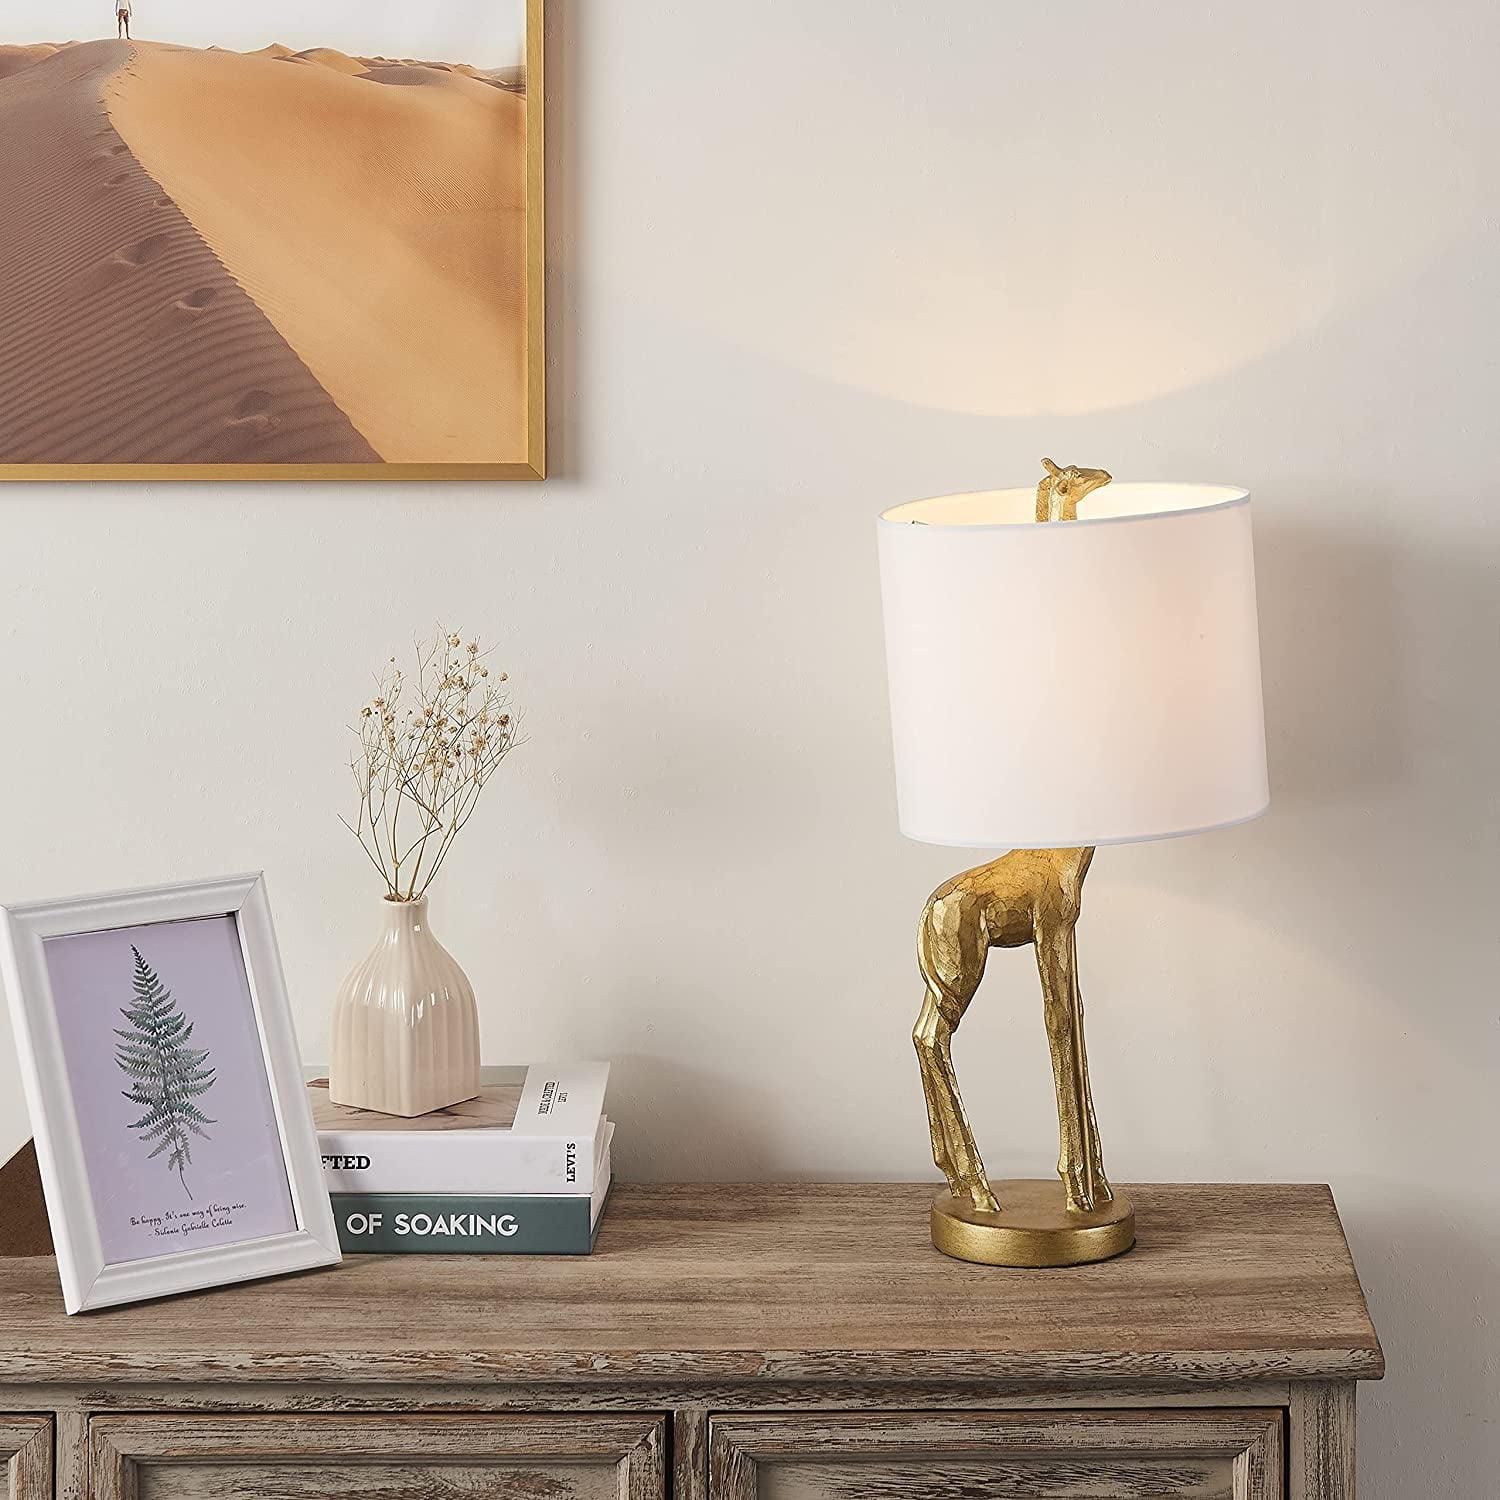 Vanity Art 16.54" Indoor Gold Table Lamp with Fabric Shade | Modern Farmhouse Bedside Lamp Giraffe Table Lamp for Bedroom, Living Room, Office, College Dorm